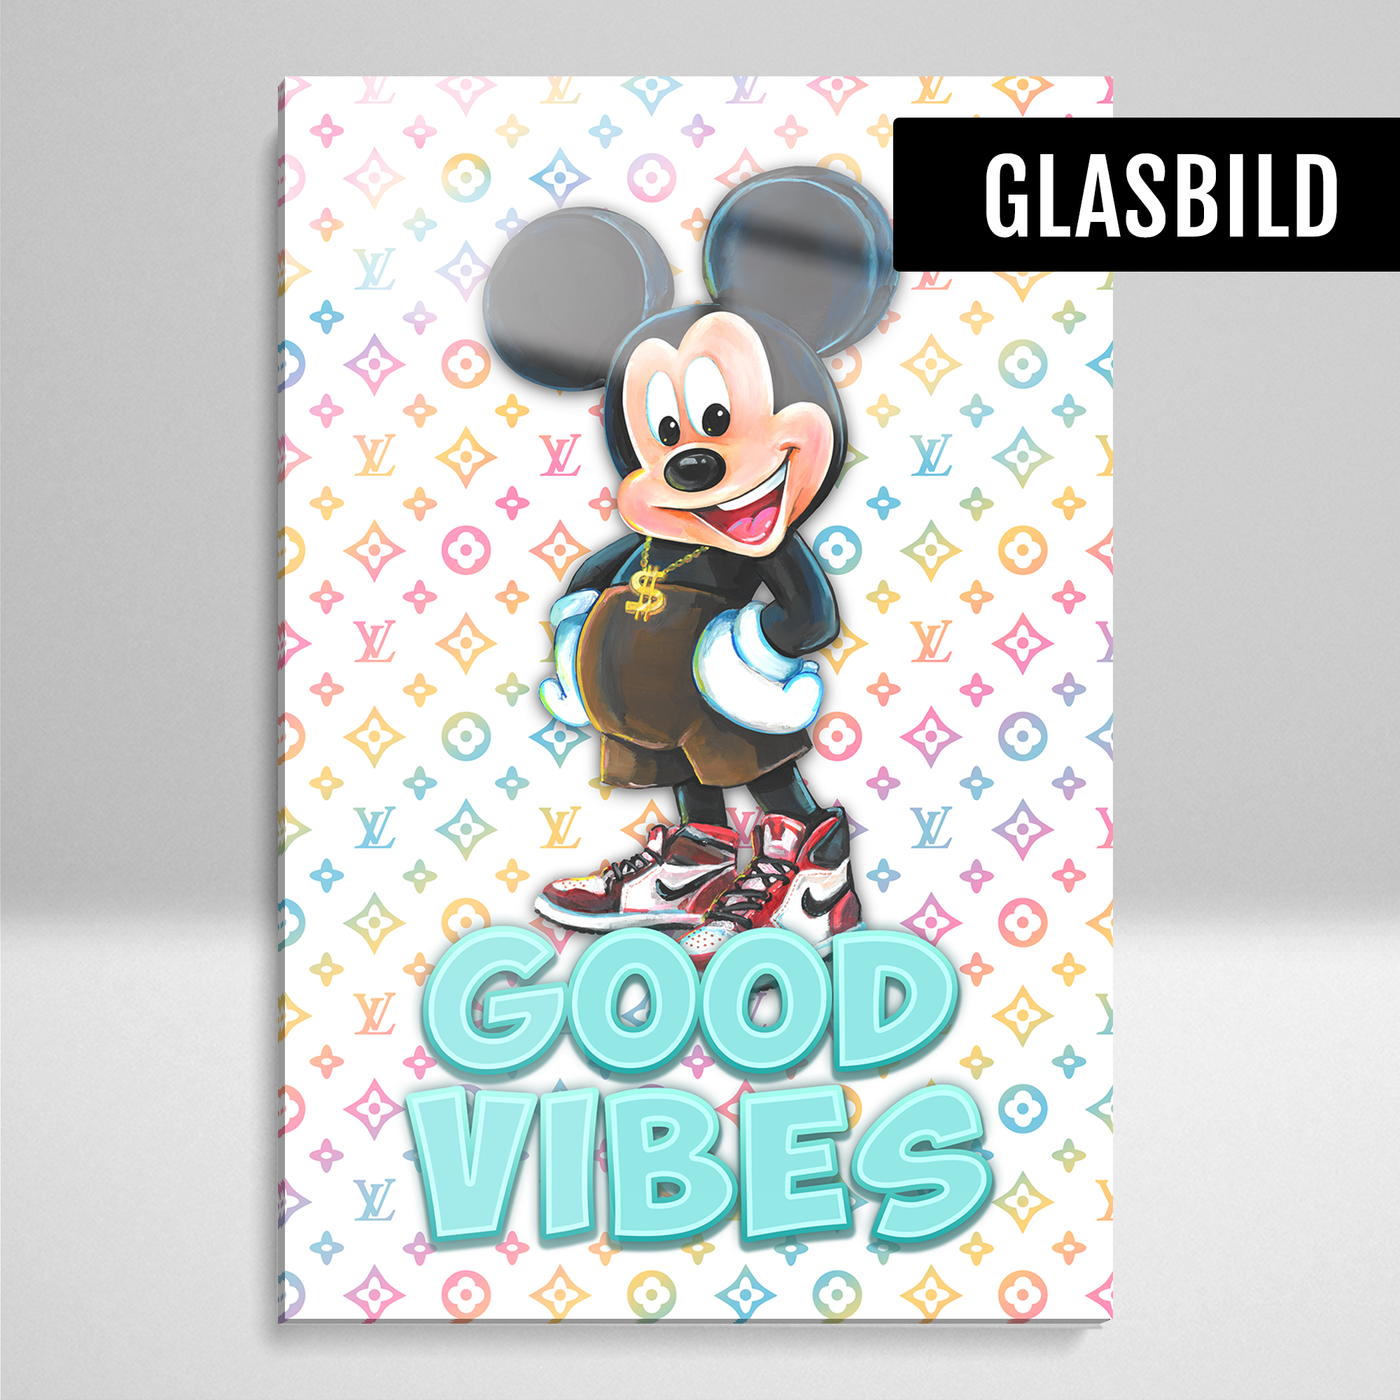 Good Vibes - Rich Mouse Colorful